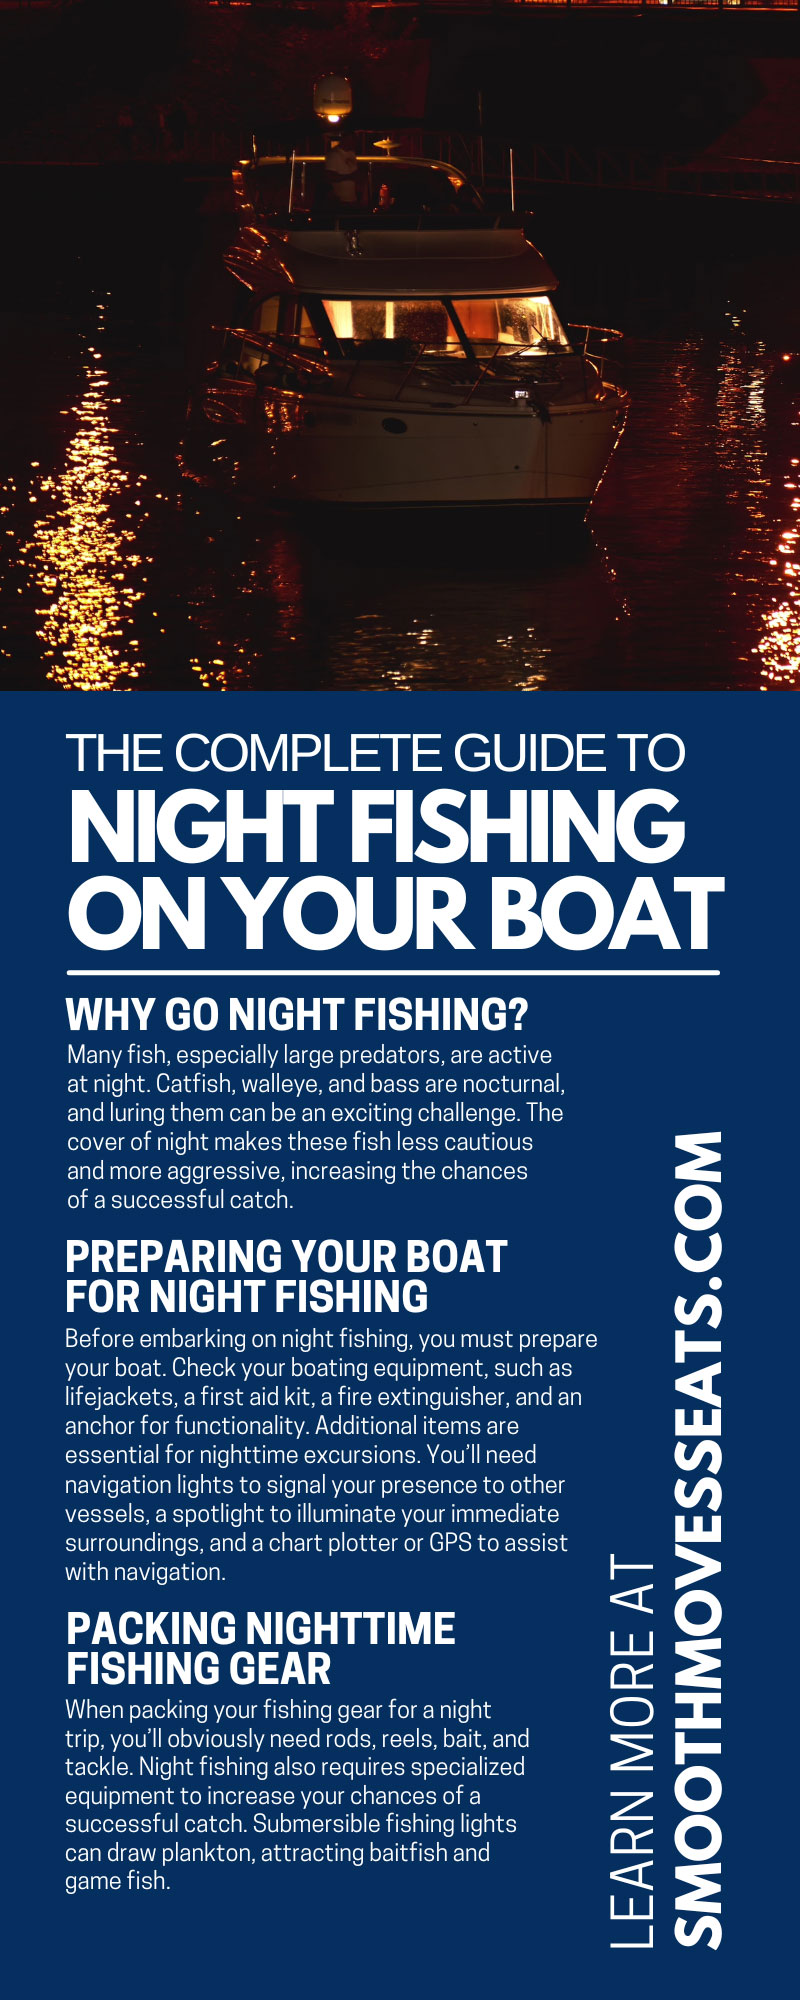 The Complete Guide to Night Fishing on Your Boat